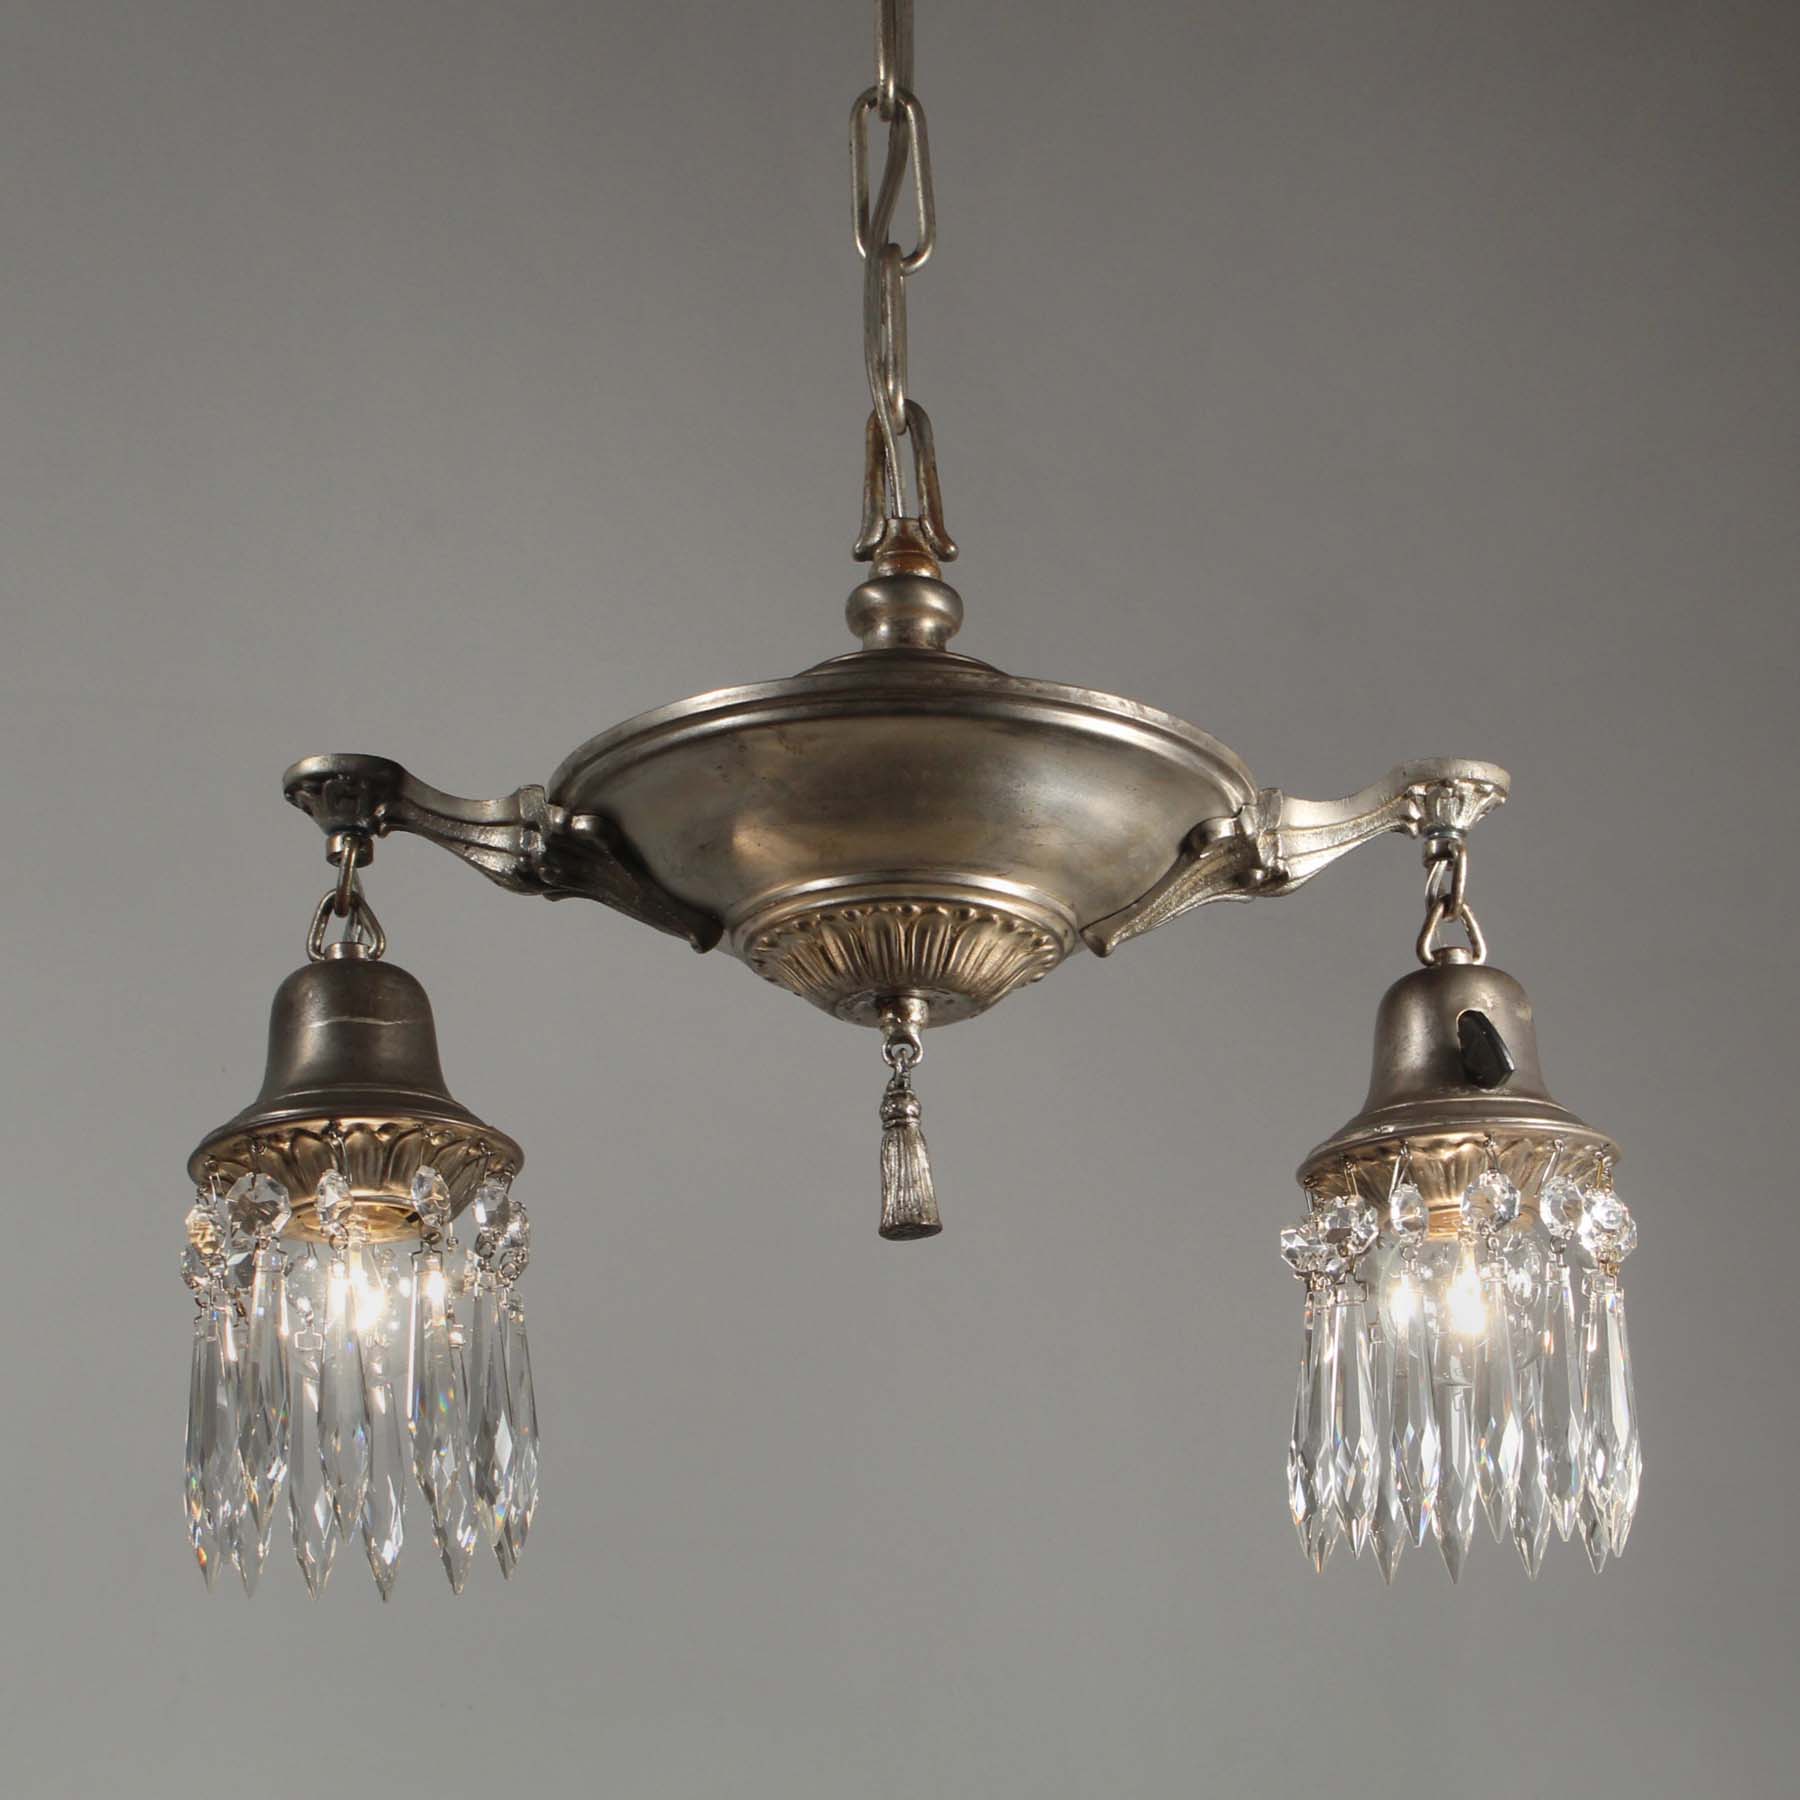 SOLD Neoclassical Silver Plated Chandelier with Prisms, Antique Lighting-67712